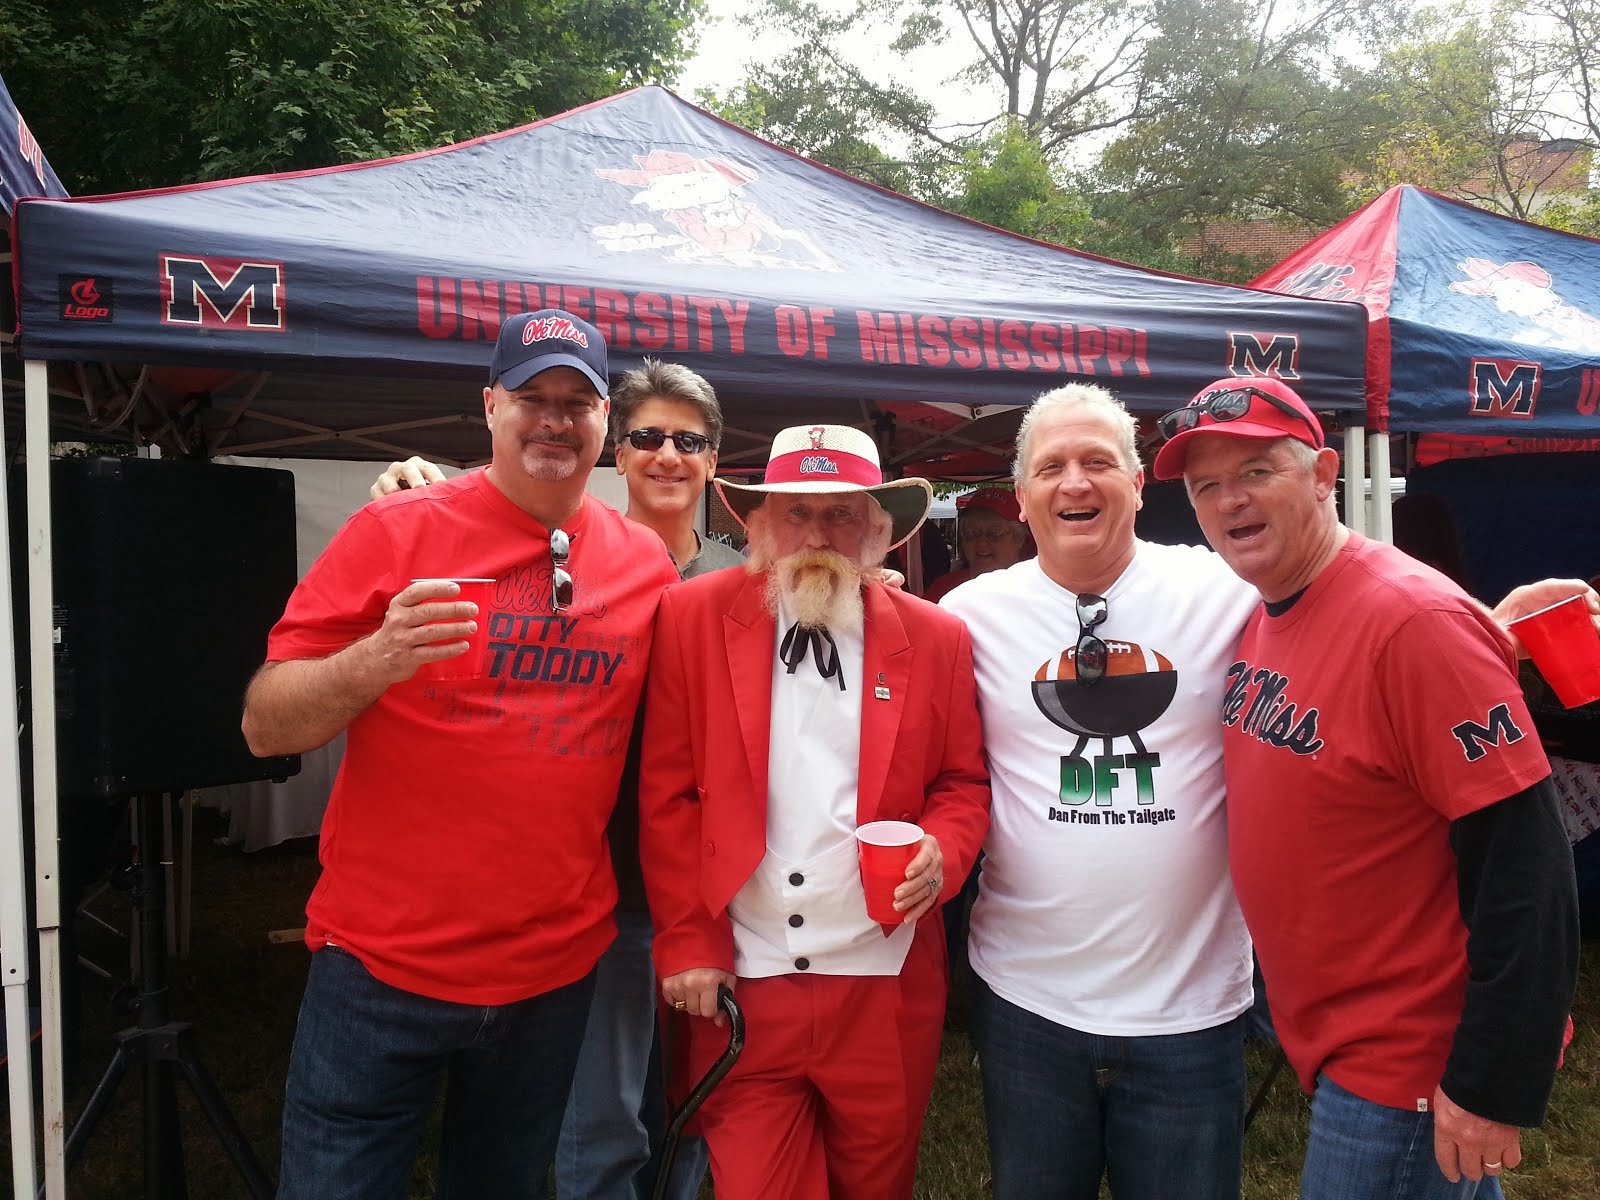 Colonel Reb and the boys